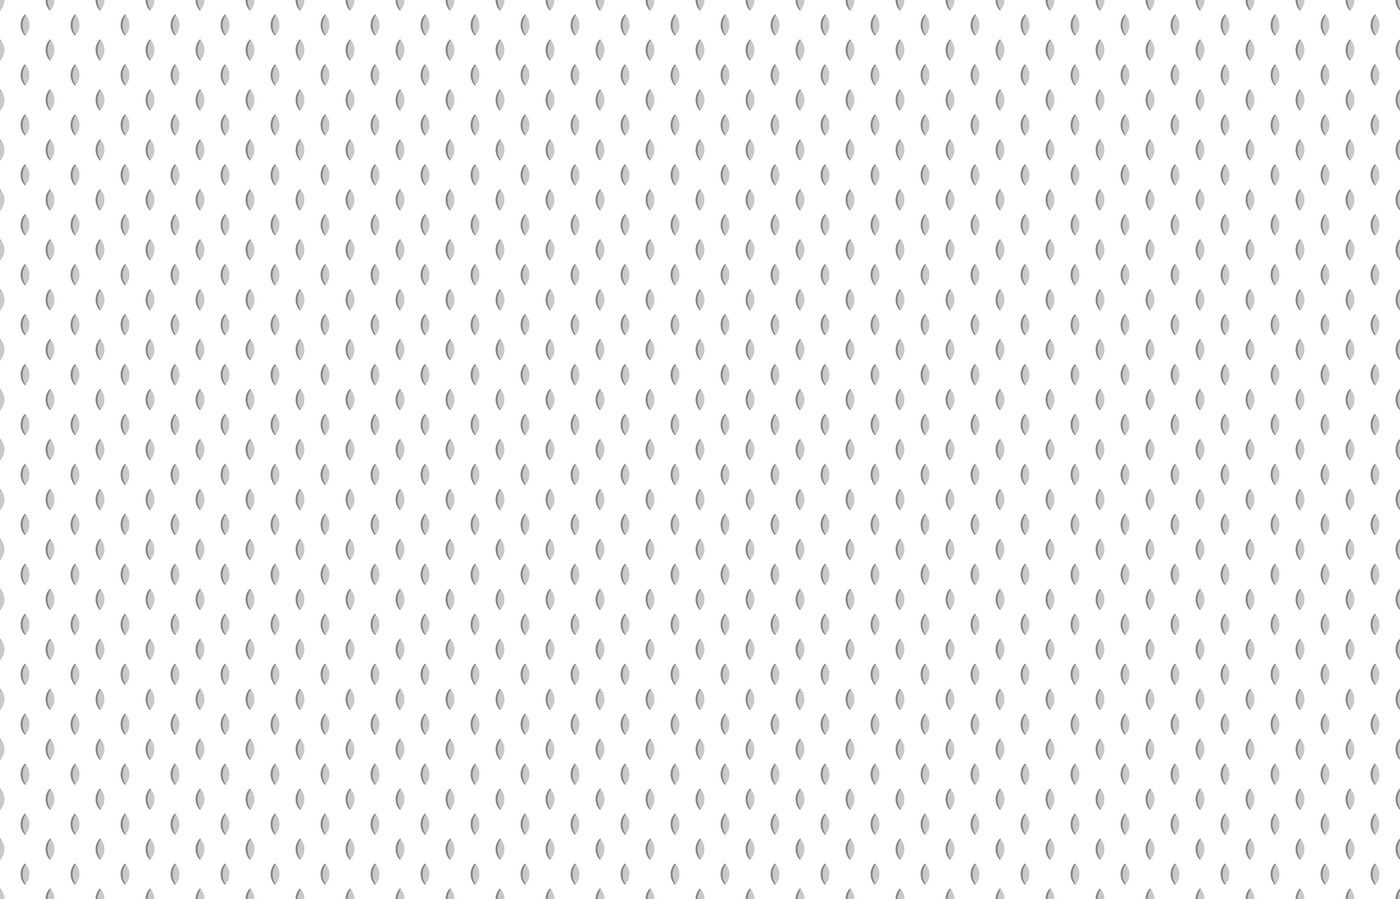 Sport jersey fabric textures. Athletic textile mesh material